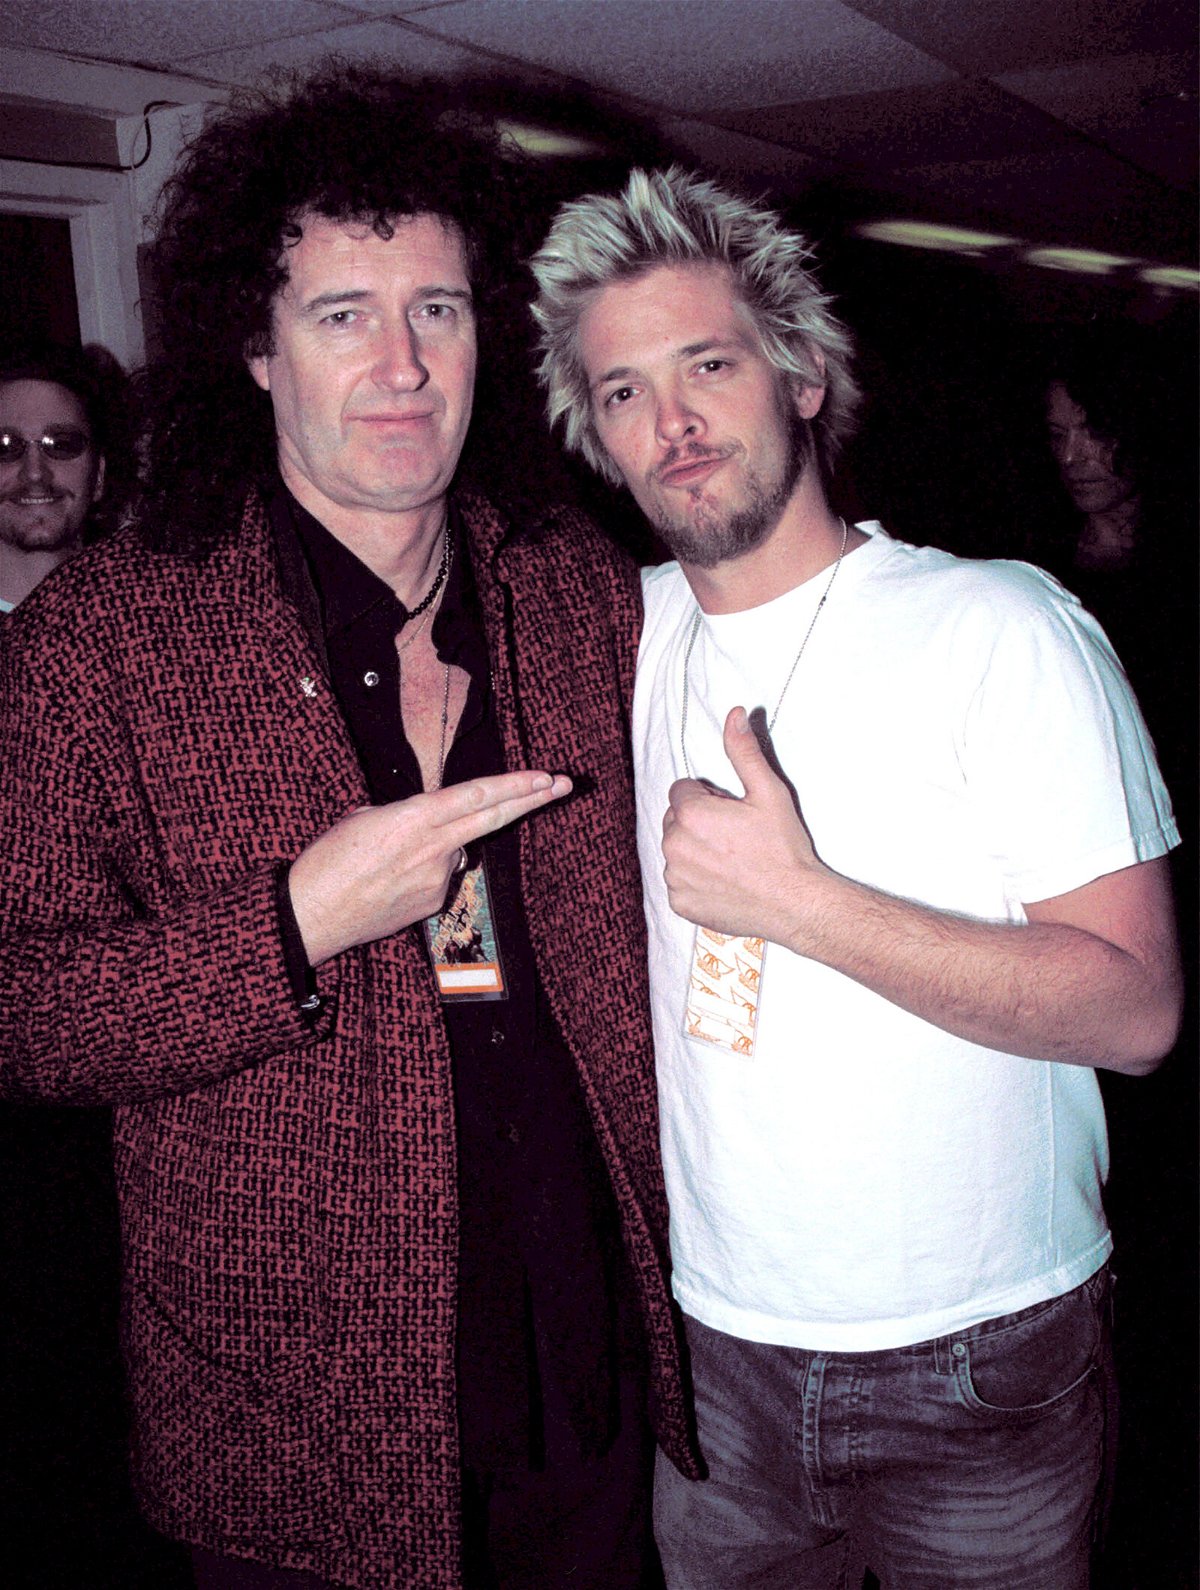 <i>David Klein/Getty Images</i><br/>Queen guitarist Brian May (L) poses with Taylor Hawkins in January 2002. Taylor Hawkins became a drummer after being wowed by Queen drummer Roger Taylor.